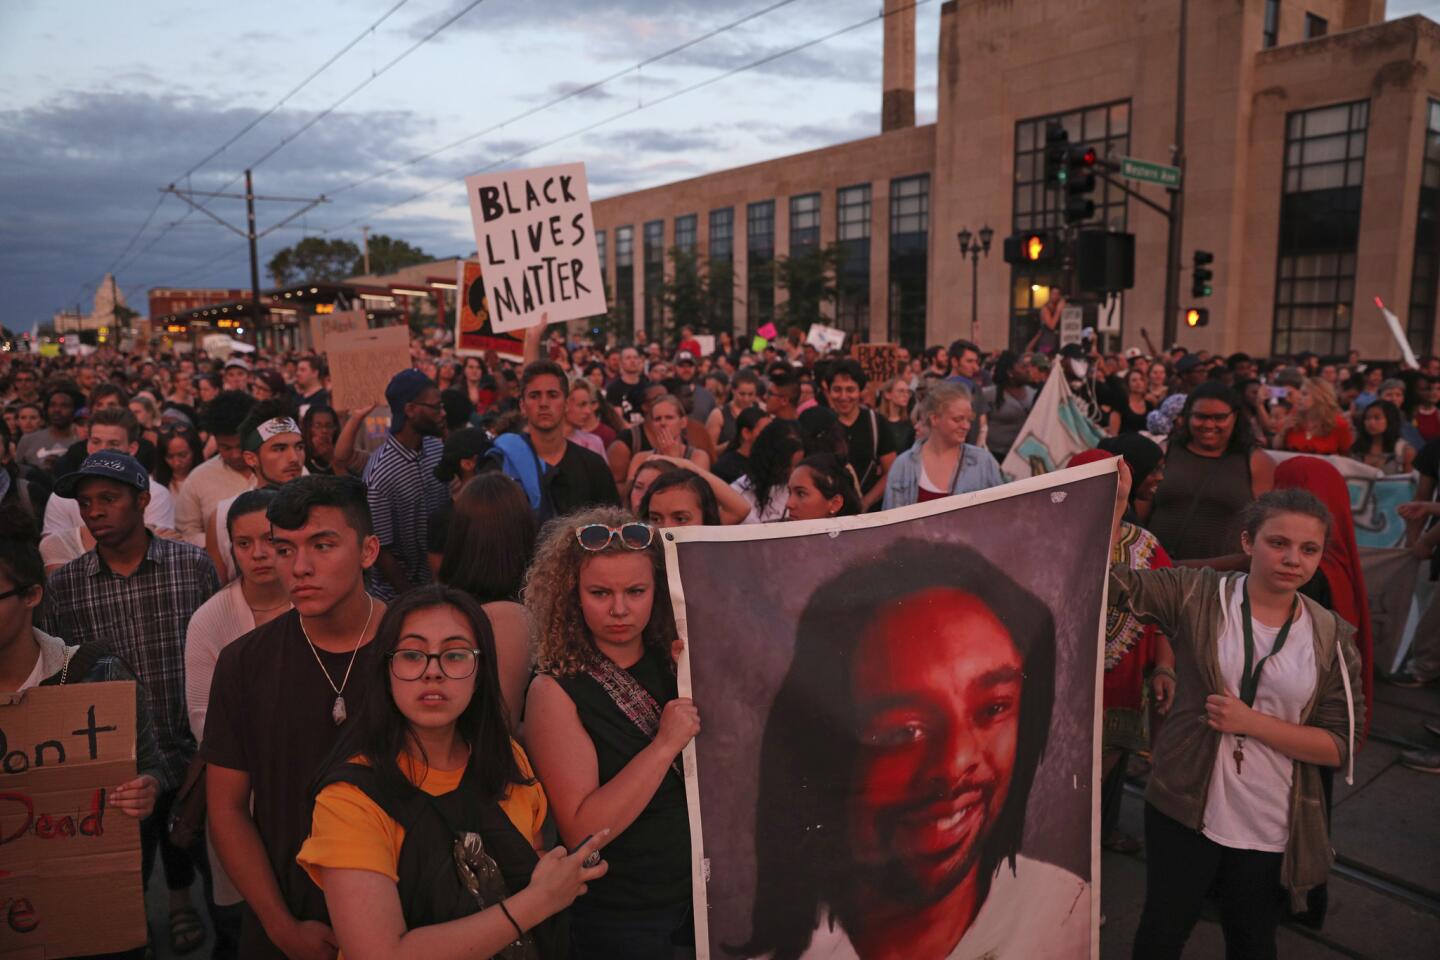 Supporters of Philando Castile held a portrait of Castile as they marched along University Avenue in St. Paul, Minn., leaving a vigil at the state Capitol on Friday, June 16, 2017. The vigil was held after St. Anthony police Officer Jeronimo Yanez was cleared of all charges in the fatal shooting last year of Castile.